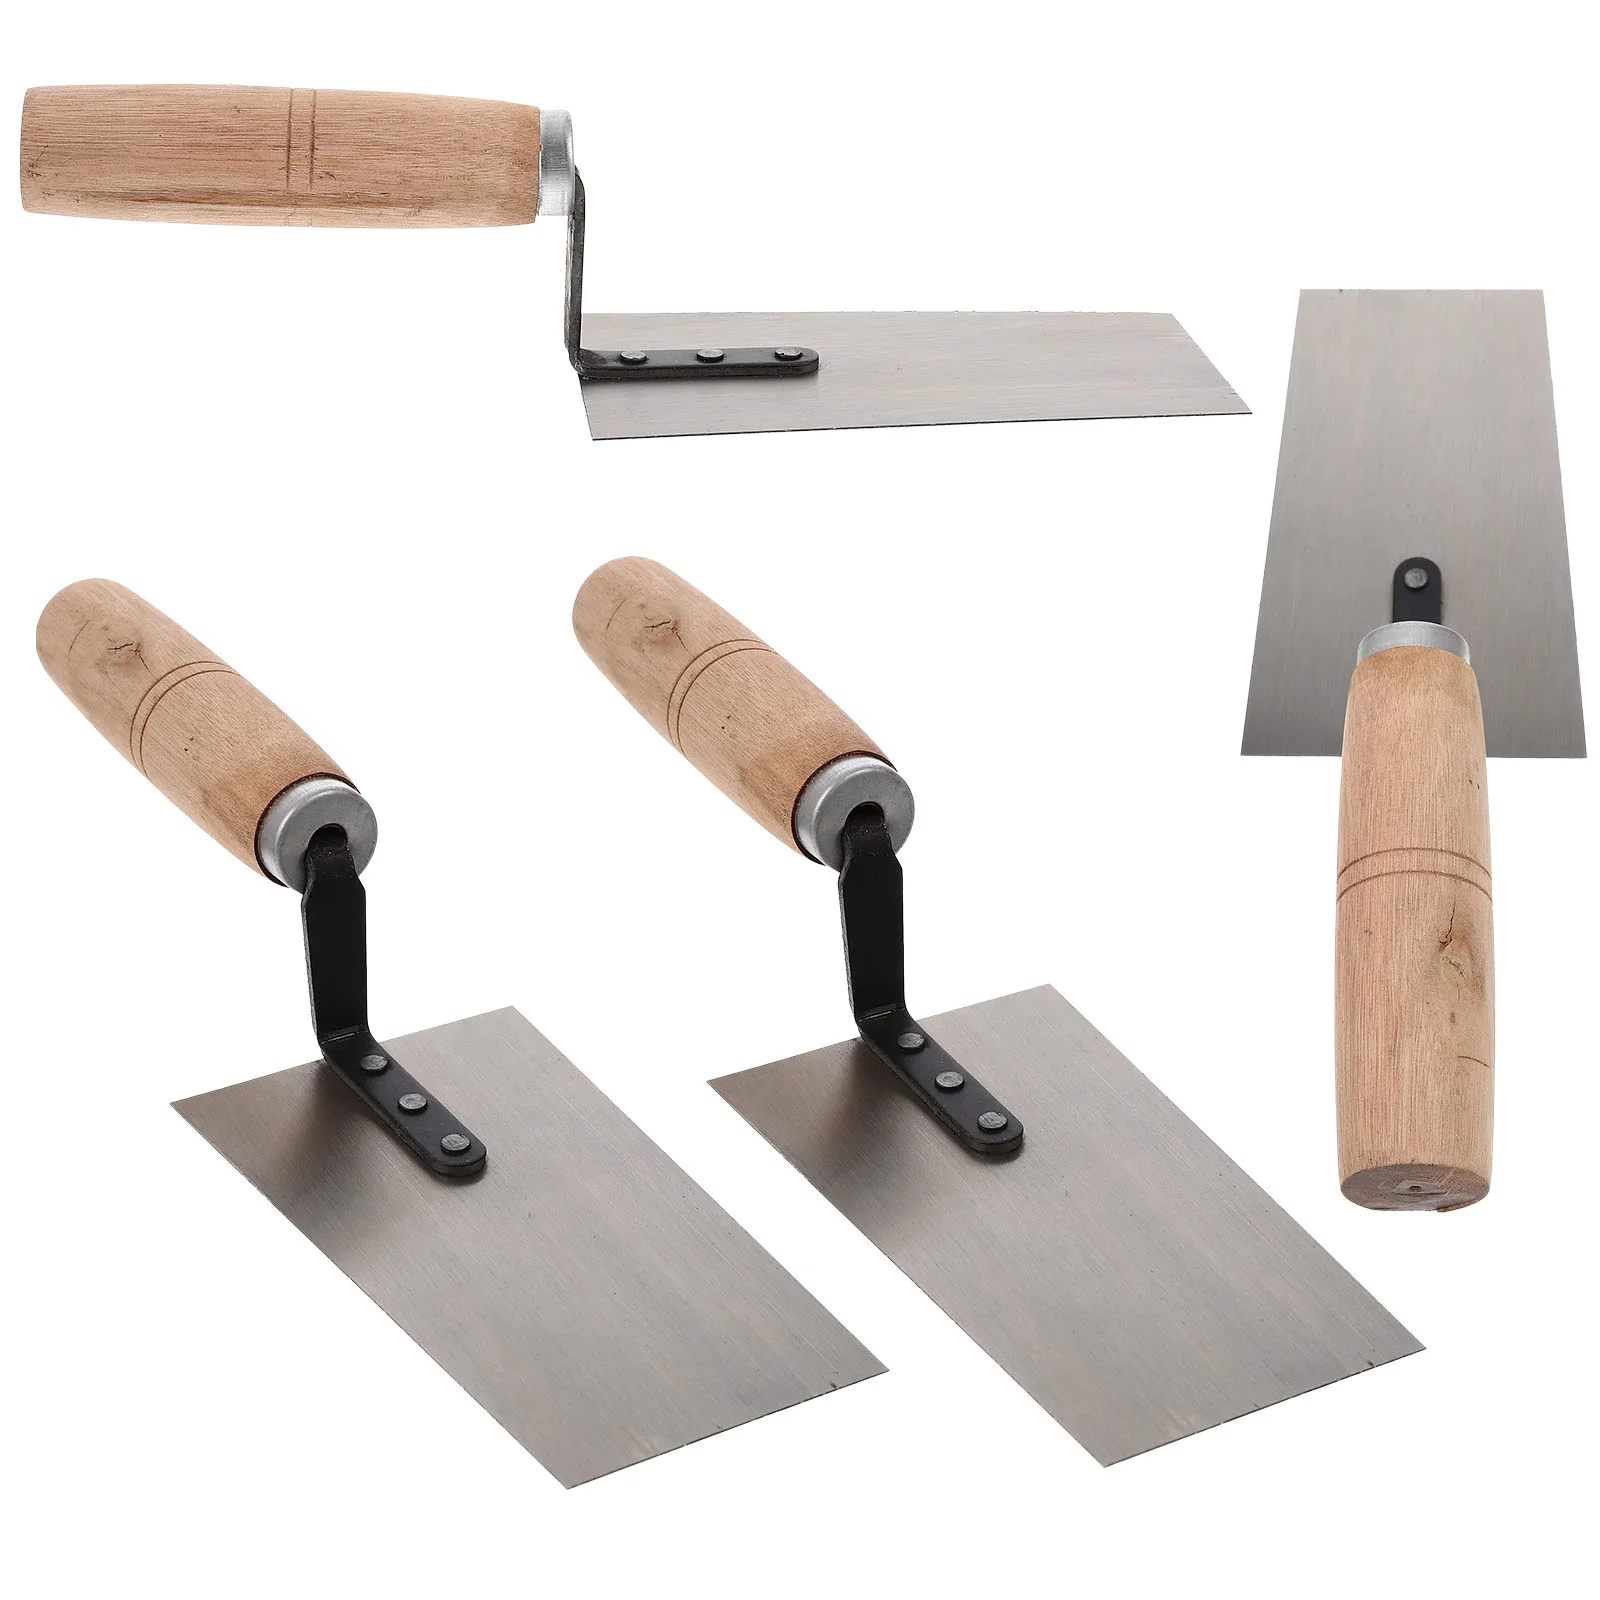 

Trowel Finishing Concrete Steel Tools Masonry Stainless Plastering Finish Hand Plaster Bricklaying Putty Scraper Power Spatula